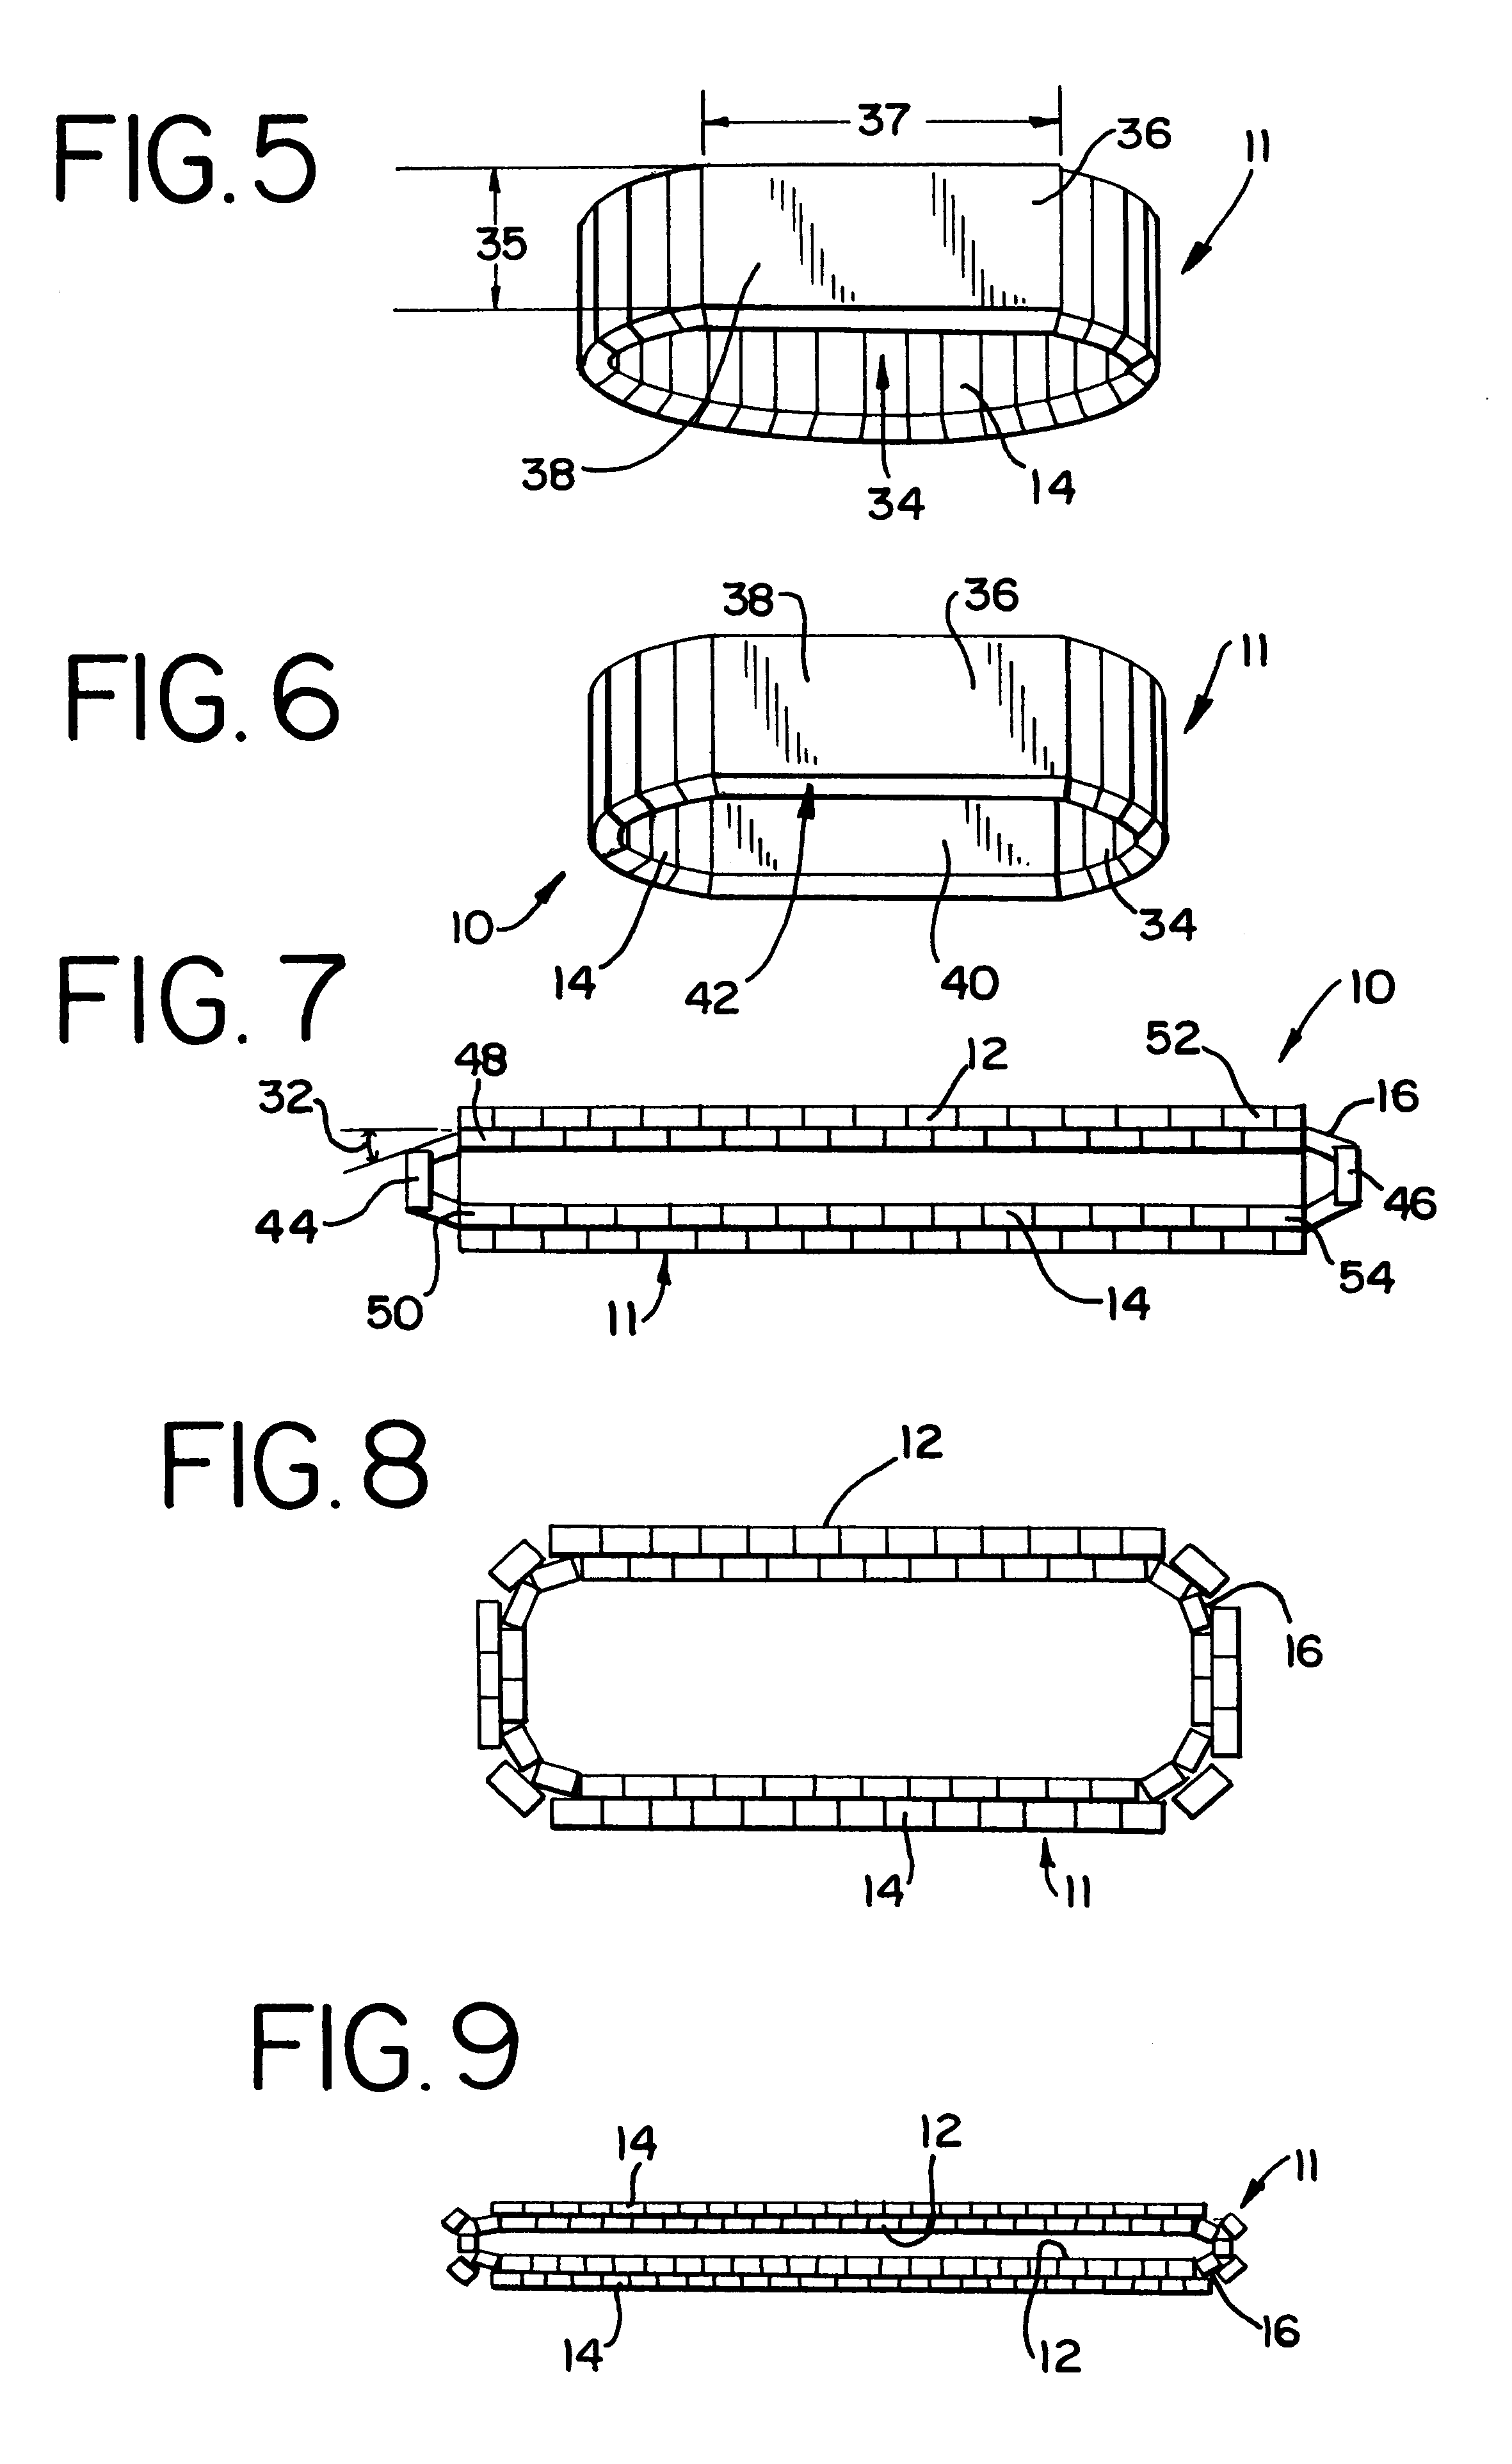 Method and apparatus for holding paper currency and credit cards